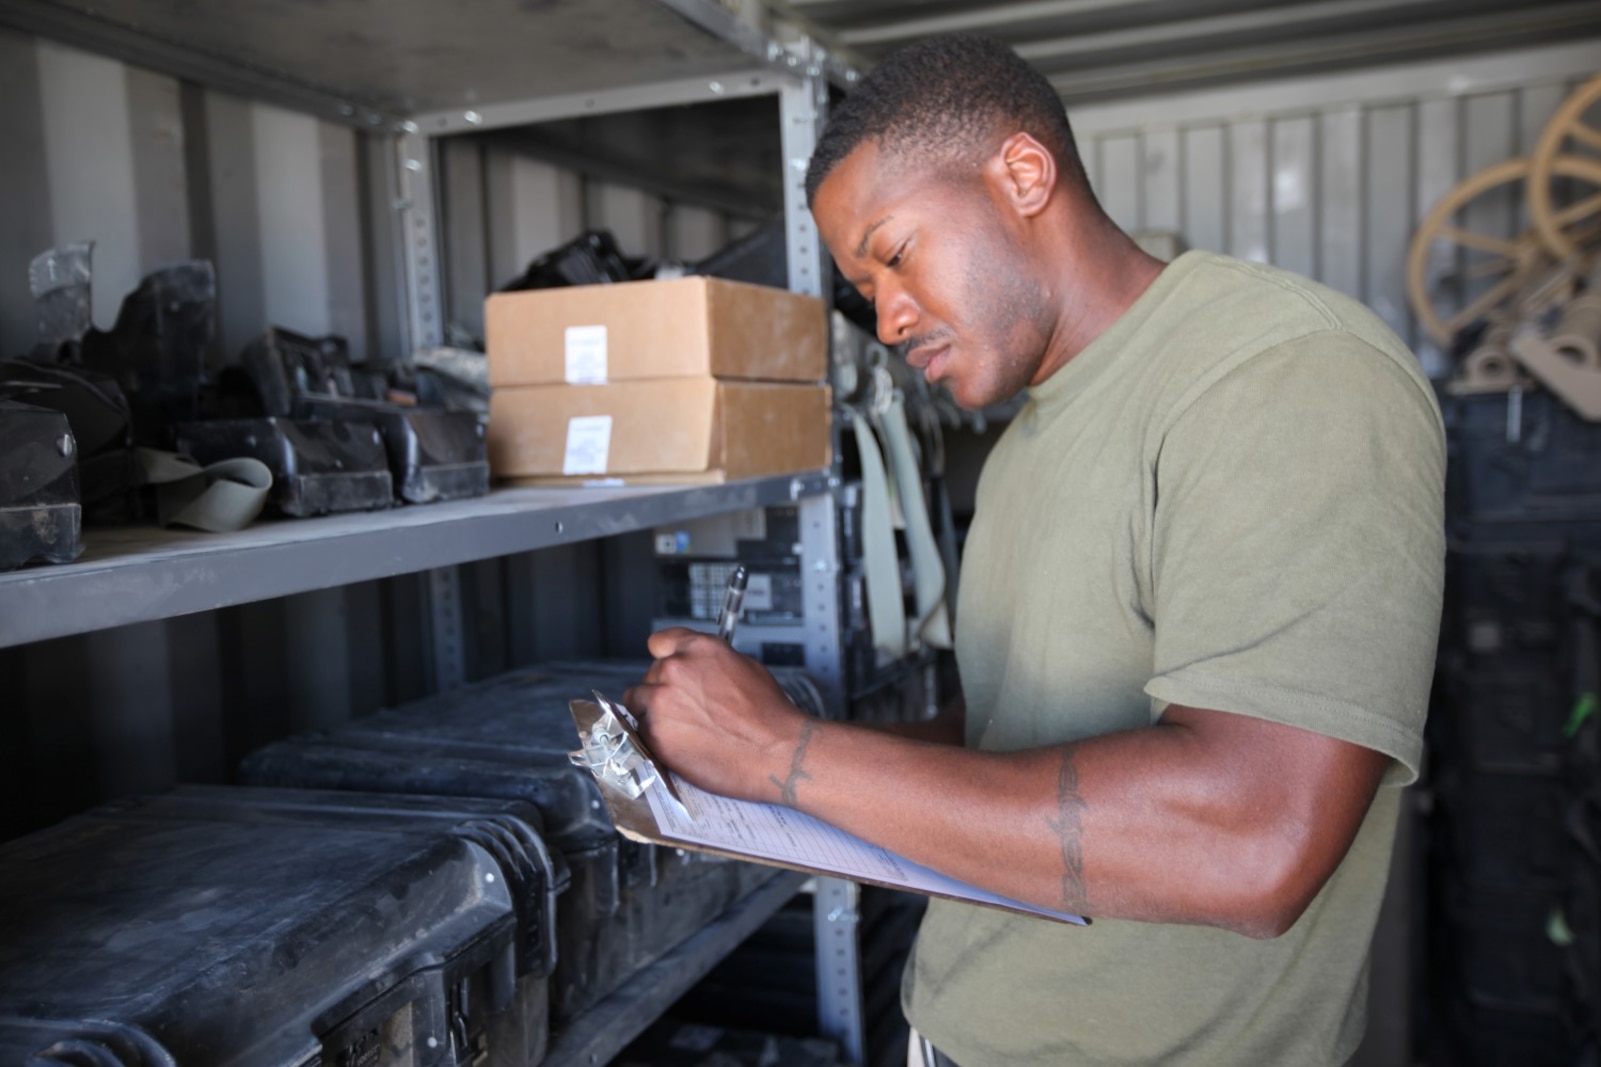 Corporal Charles Daniels, supply warehouse chief, 1st Battalion, 2nd Marine Regiment, takes inventory of some of the battalion's gear aboard Camp Leatherneck, Afghanistan, July 9, 2014. Daniels, a native of Baton Rouge, La., and only four other Marines are the responsible holders and maintainers of 1st Bn., 2nd Marines' $117 million supply of gear and equipment to be retrograded upon the unit's redeployment. (U.S. Marine Corps Photo By: Sgt. Frances Johnson)